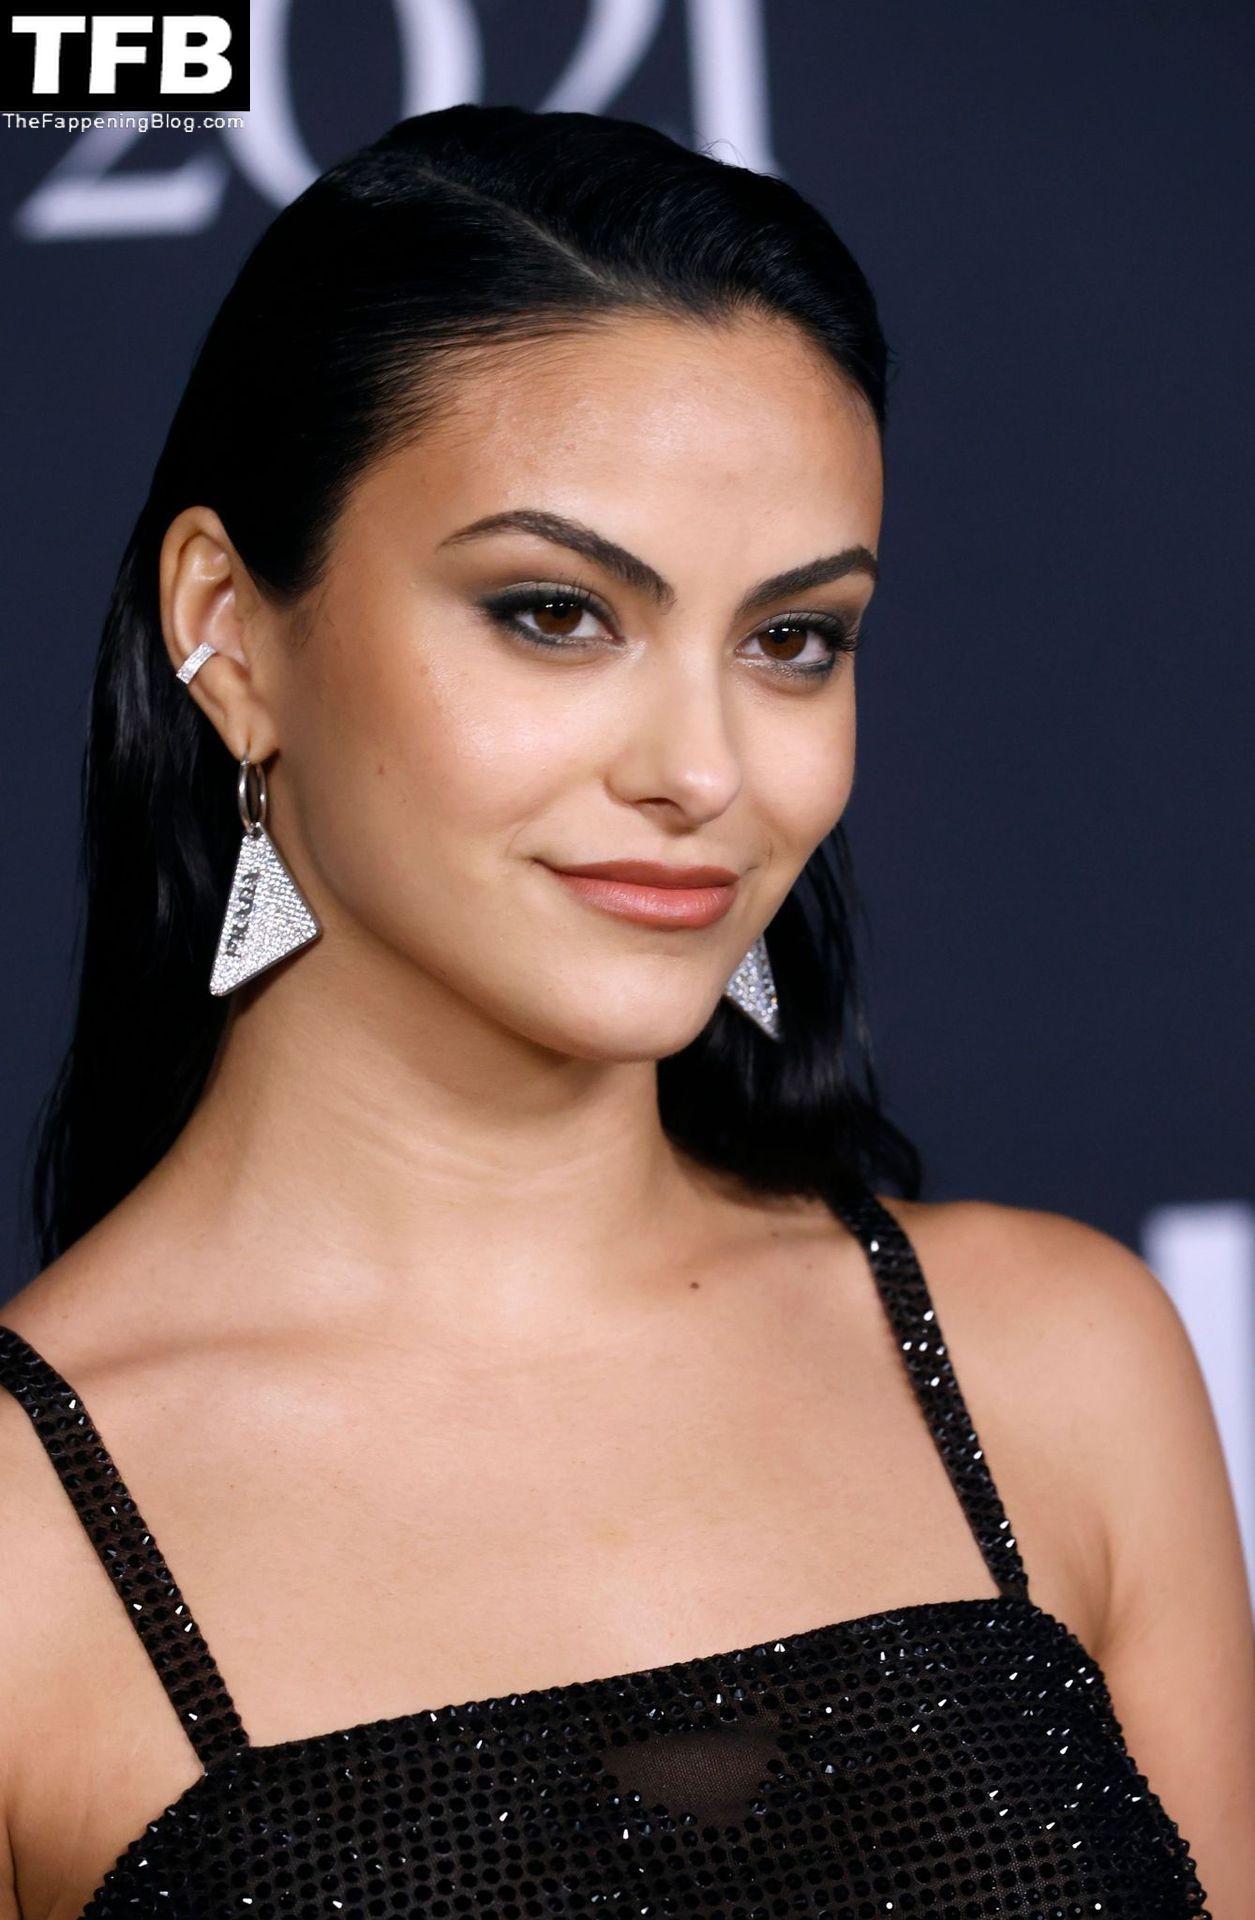 Camila-Mendes-See-Through-Tits-The-Fappening-Blog-35.jpg